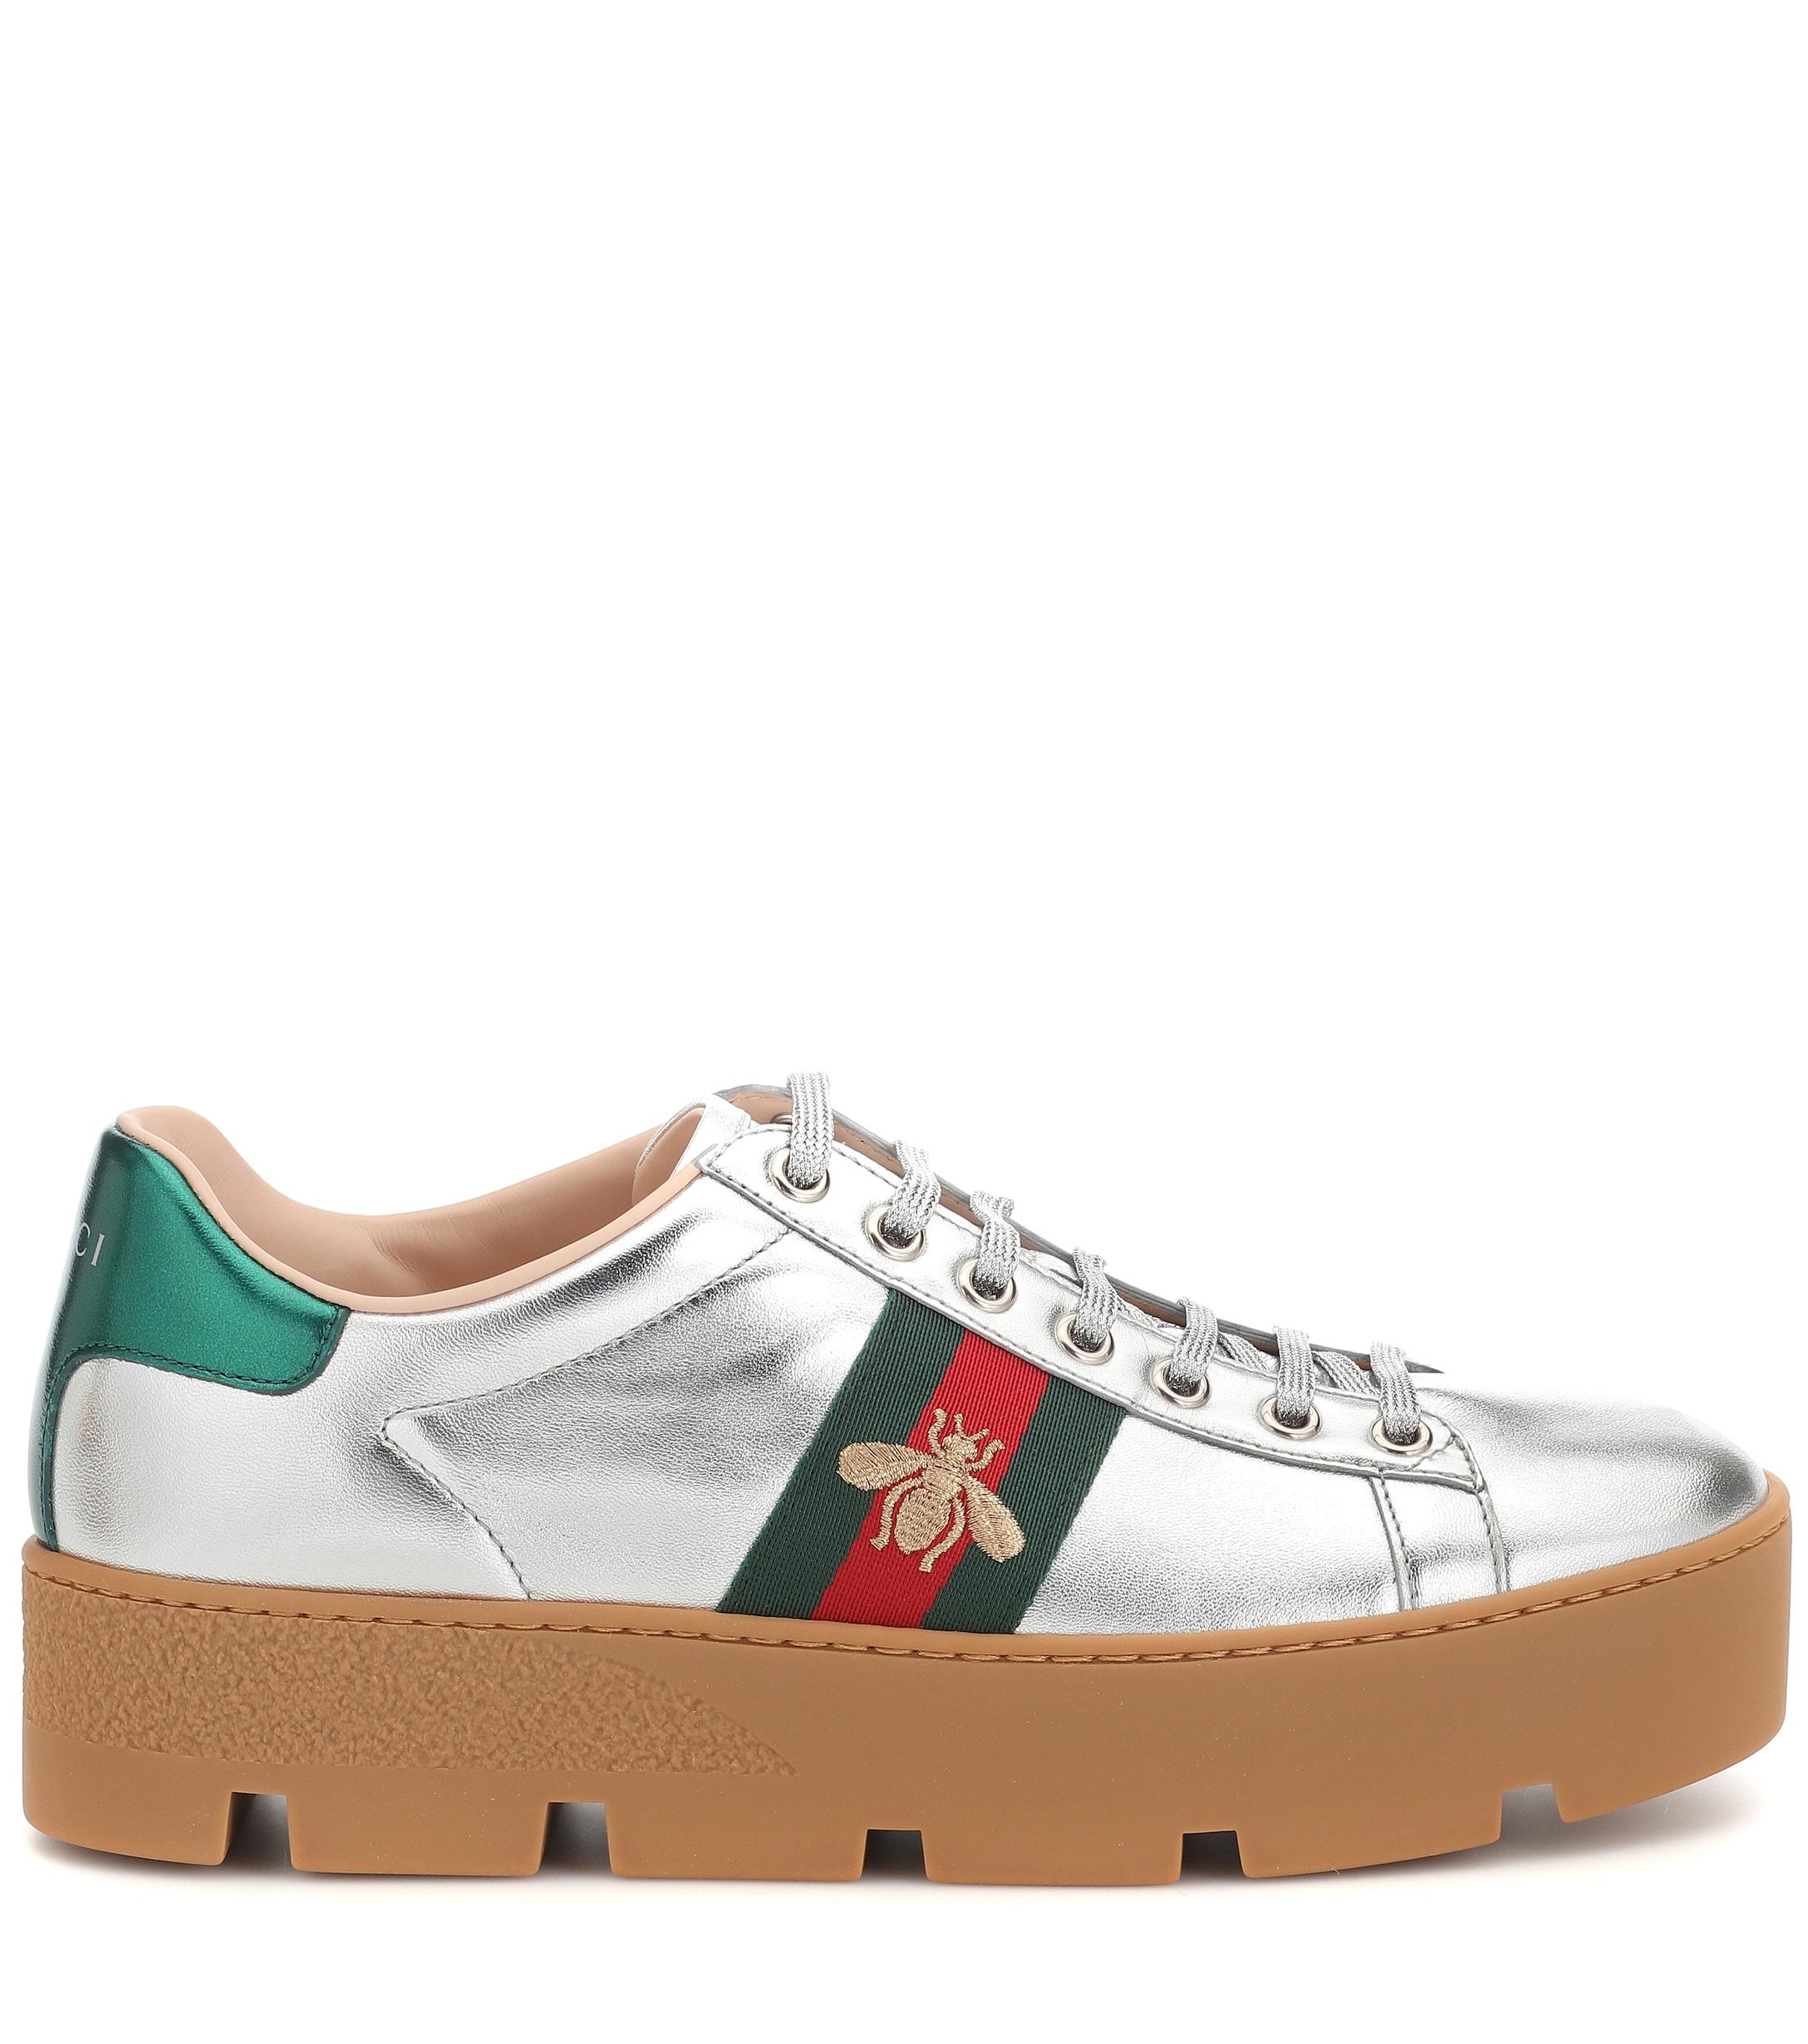 Gucci Ace Leather Platform Sneakers in Silver (Metallic) - Lyst